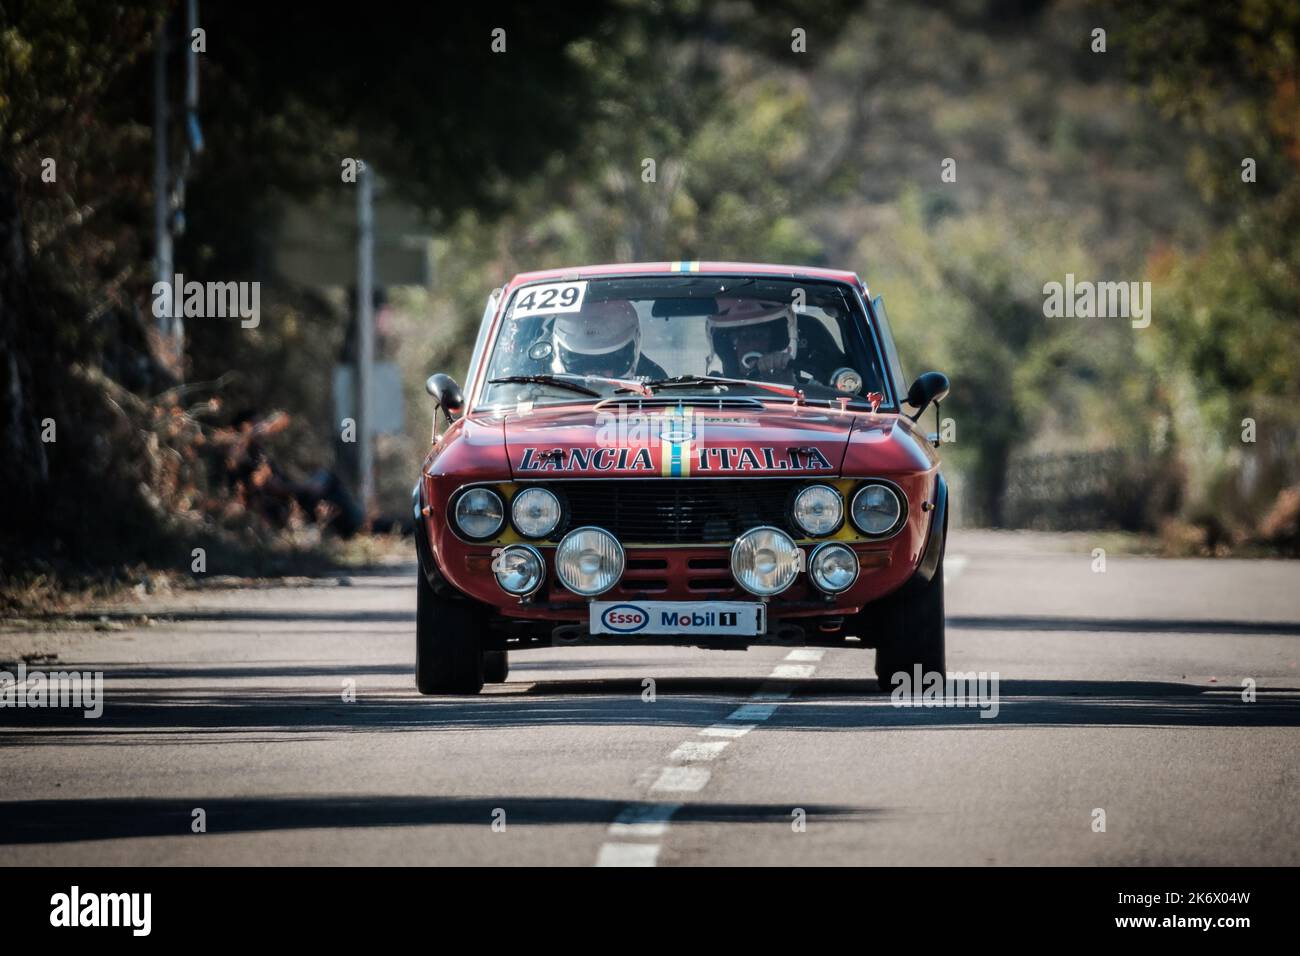 Novella, Corsica, France - 7th October 2022: Karsten Wohlenberg and Patricia Leidig compete in their Lancia Fulvia in the 2022 Tour de Corse Historiqu Stock Photo